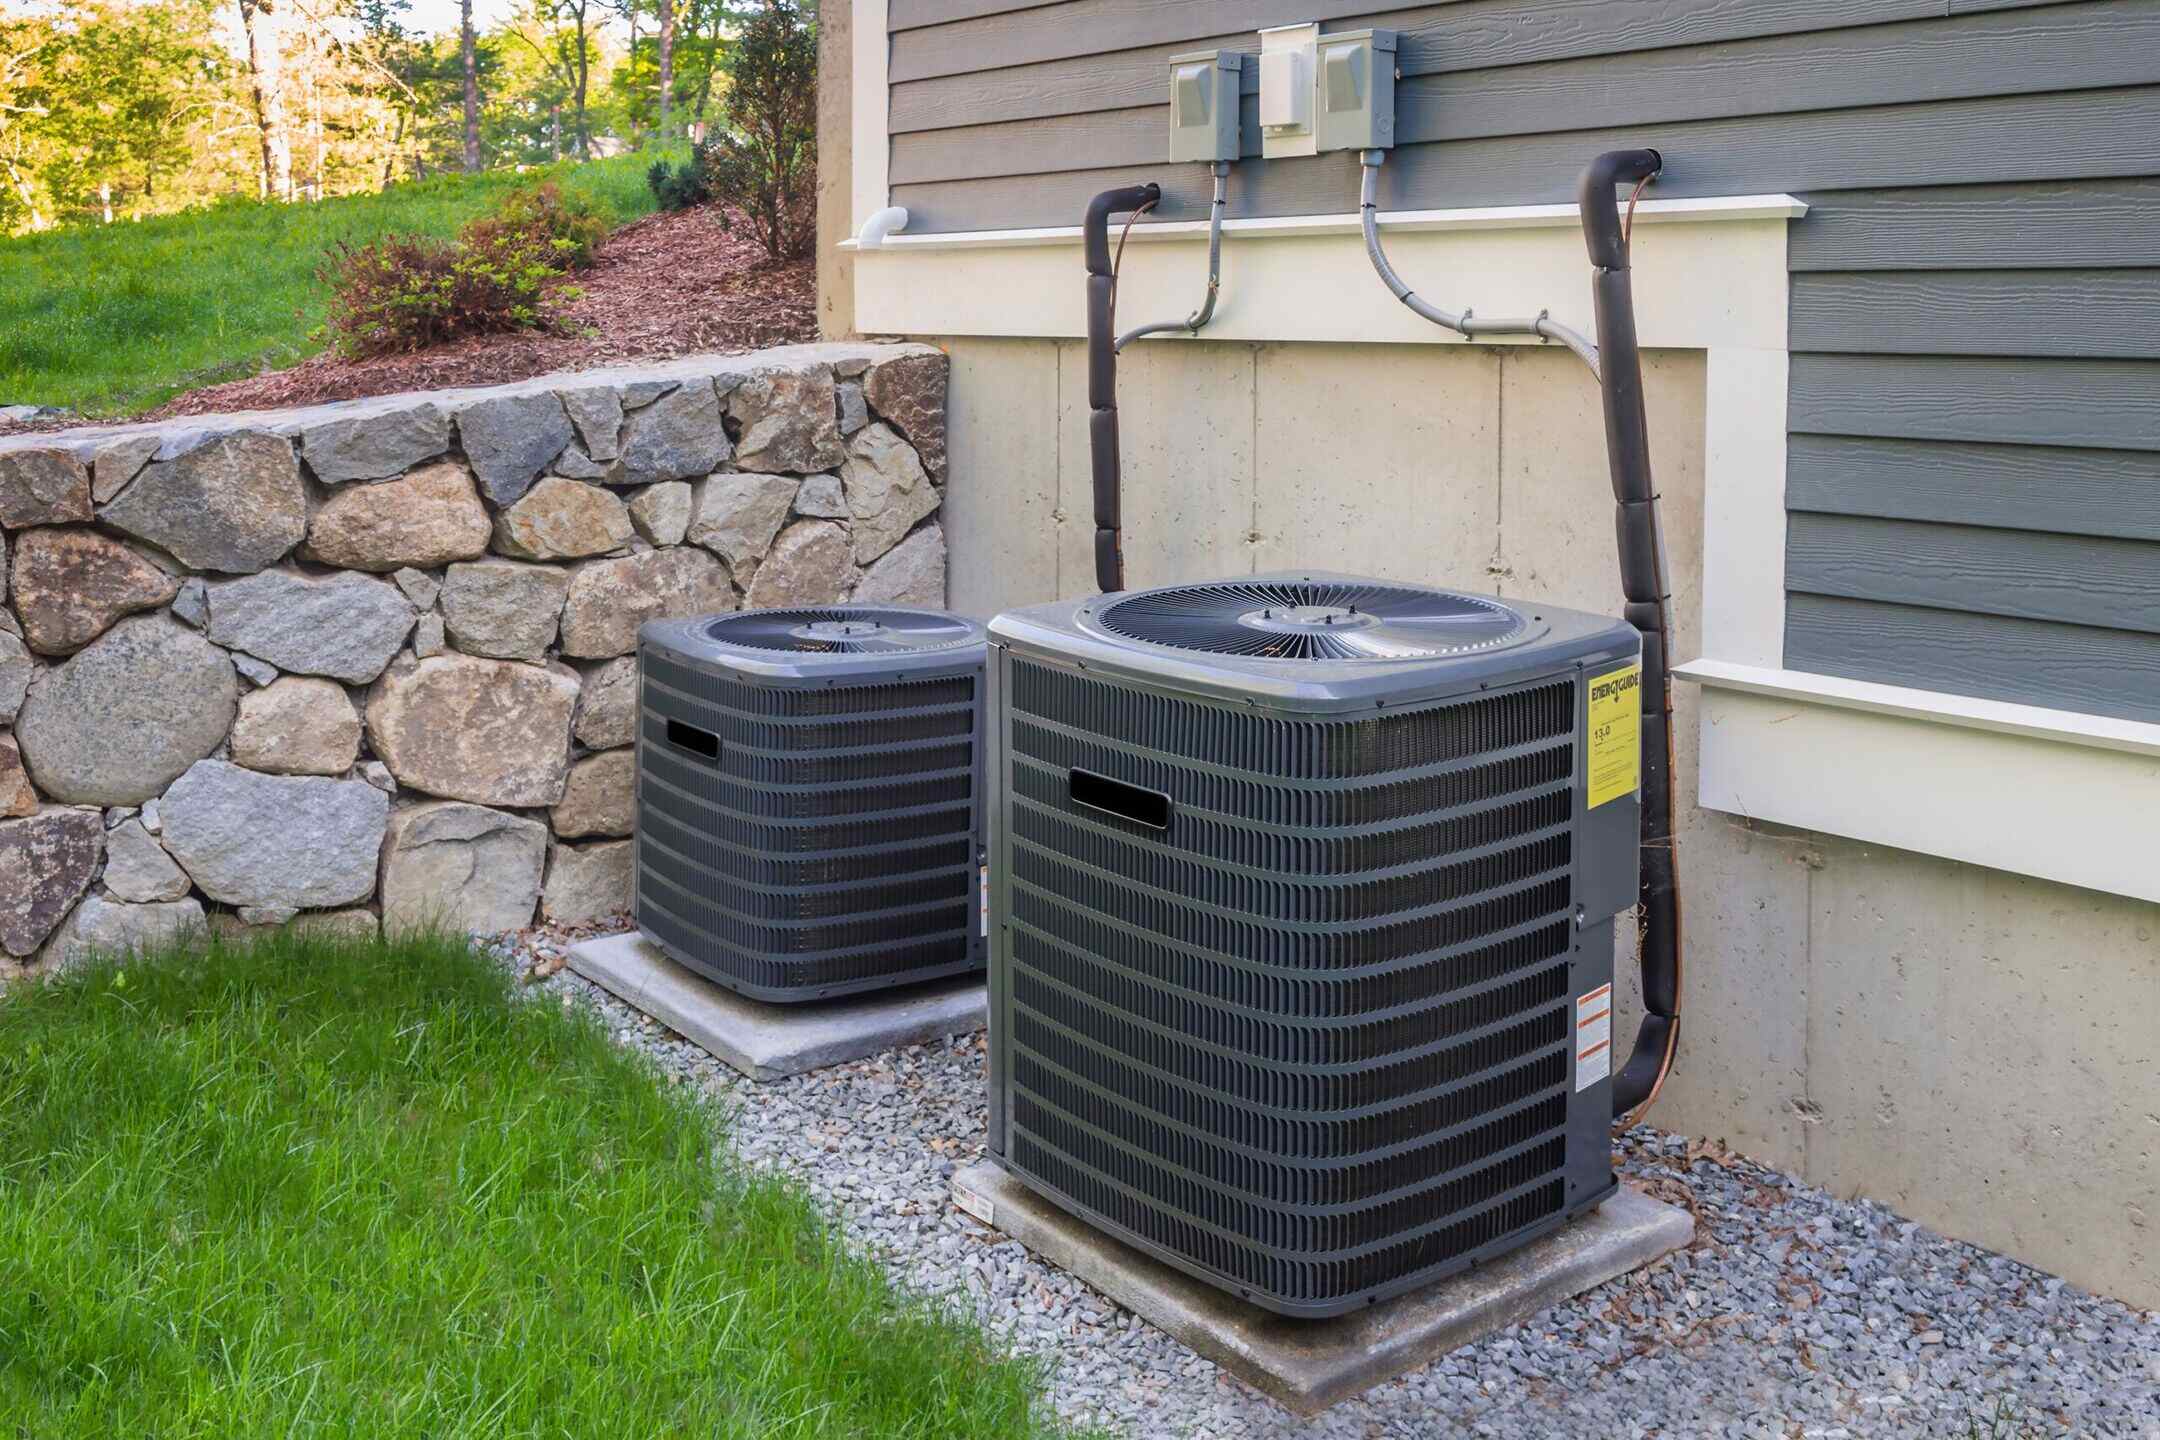 Which Is The Best Location For An Outdoor Condensing Unit?